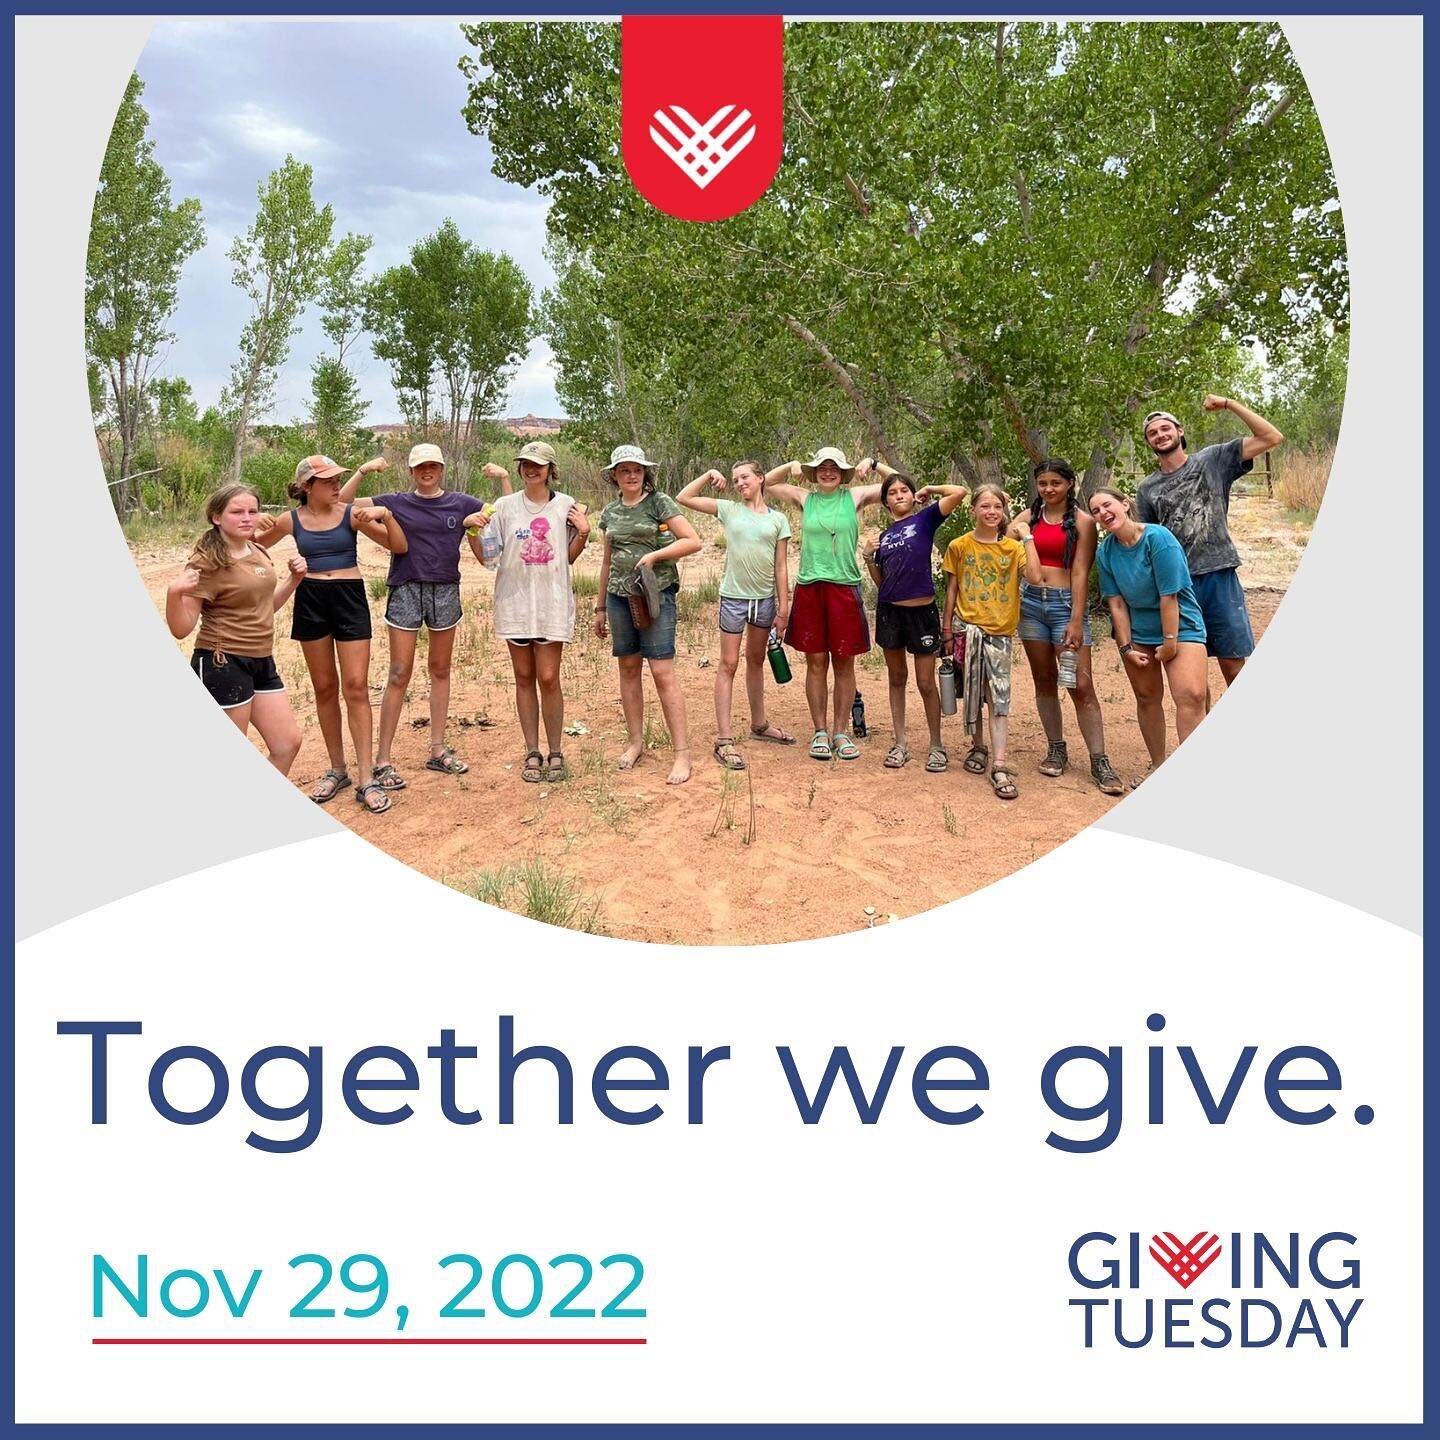 Our major annual fundraiser is just around the corner! Please consider joining our Giving Tuesday campaign to keep the Ranch thriving. We&rsquo;ll have donation links here, on Facebook, and on our website. Your generous support makes ranch magic poss